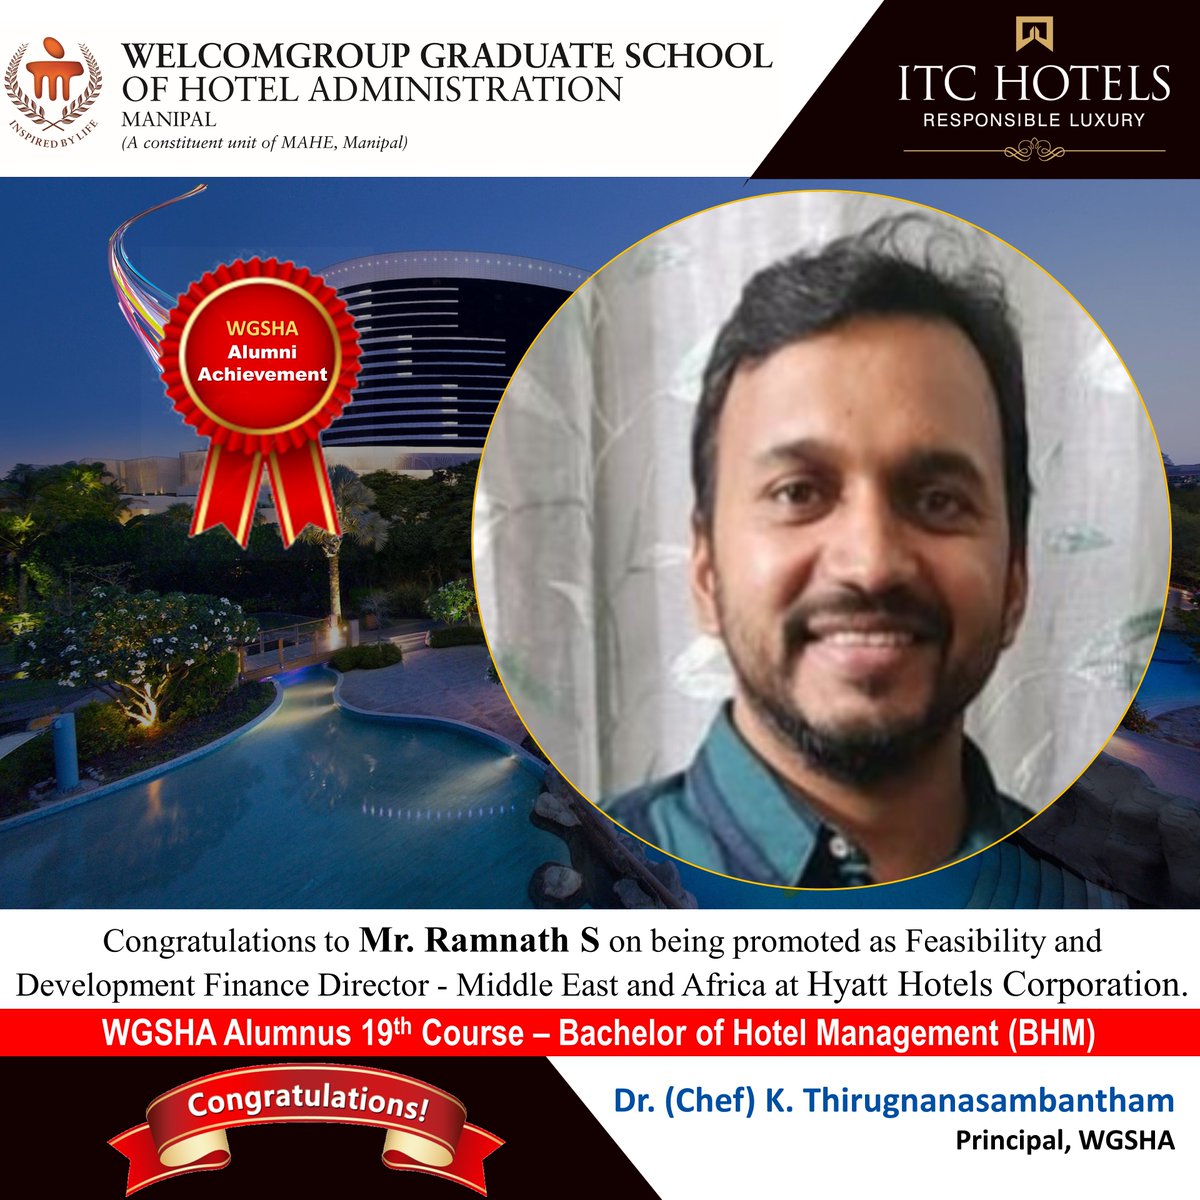 #WGSHA takes immense pride in announcing the outstanding achievement of Mr. Ramnath S., a distinguished alumnus of the 19th BHM course, on his recent promotion to Feasibility & Development Director – Middle East & Africa at Hyatt Hotels Corpn. 
#AlumniAchievements #WGSHAalumnus